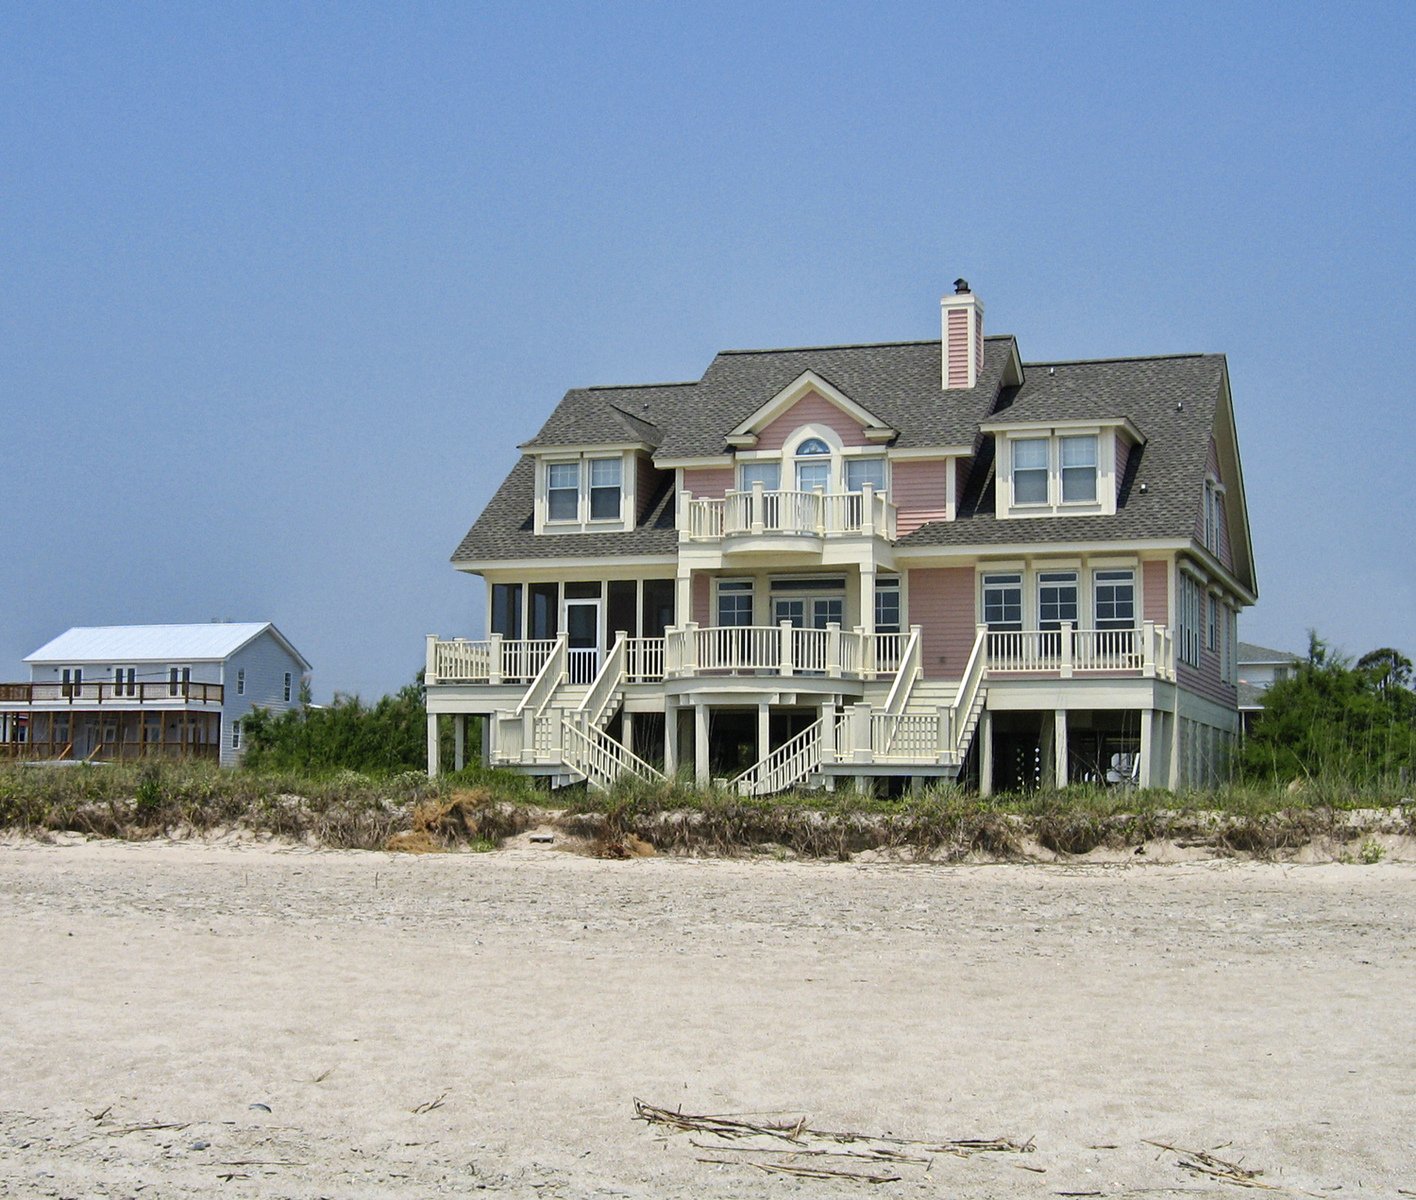 there is a large beach house with two porches and three story balcony